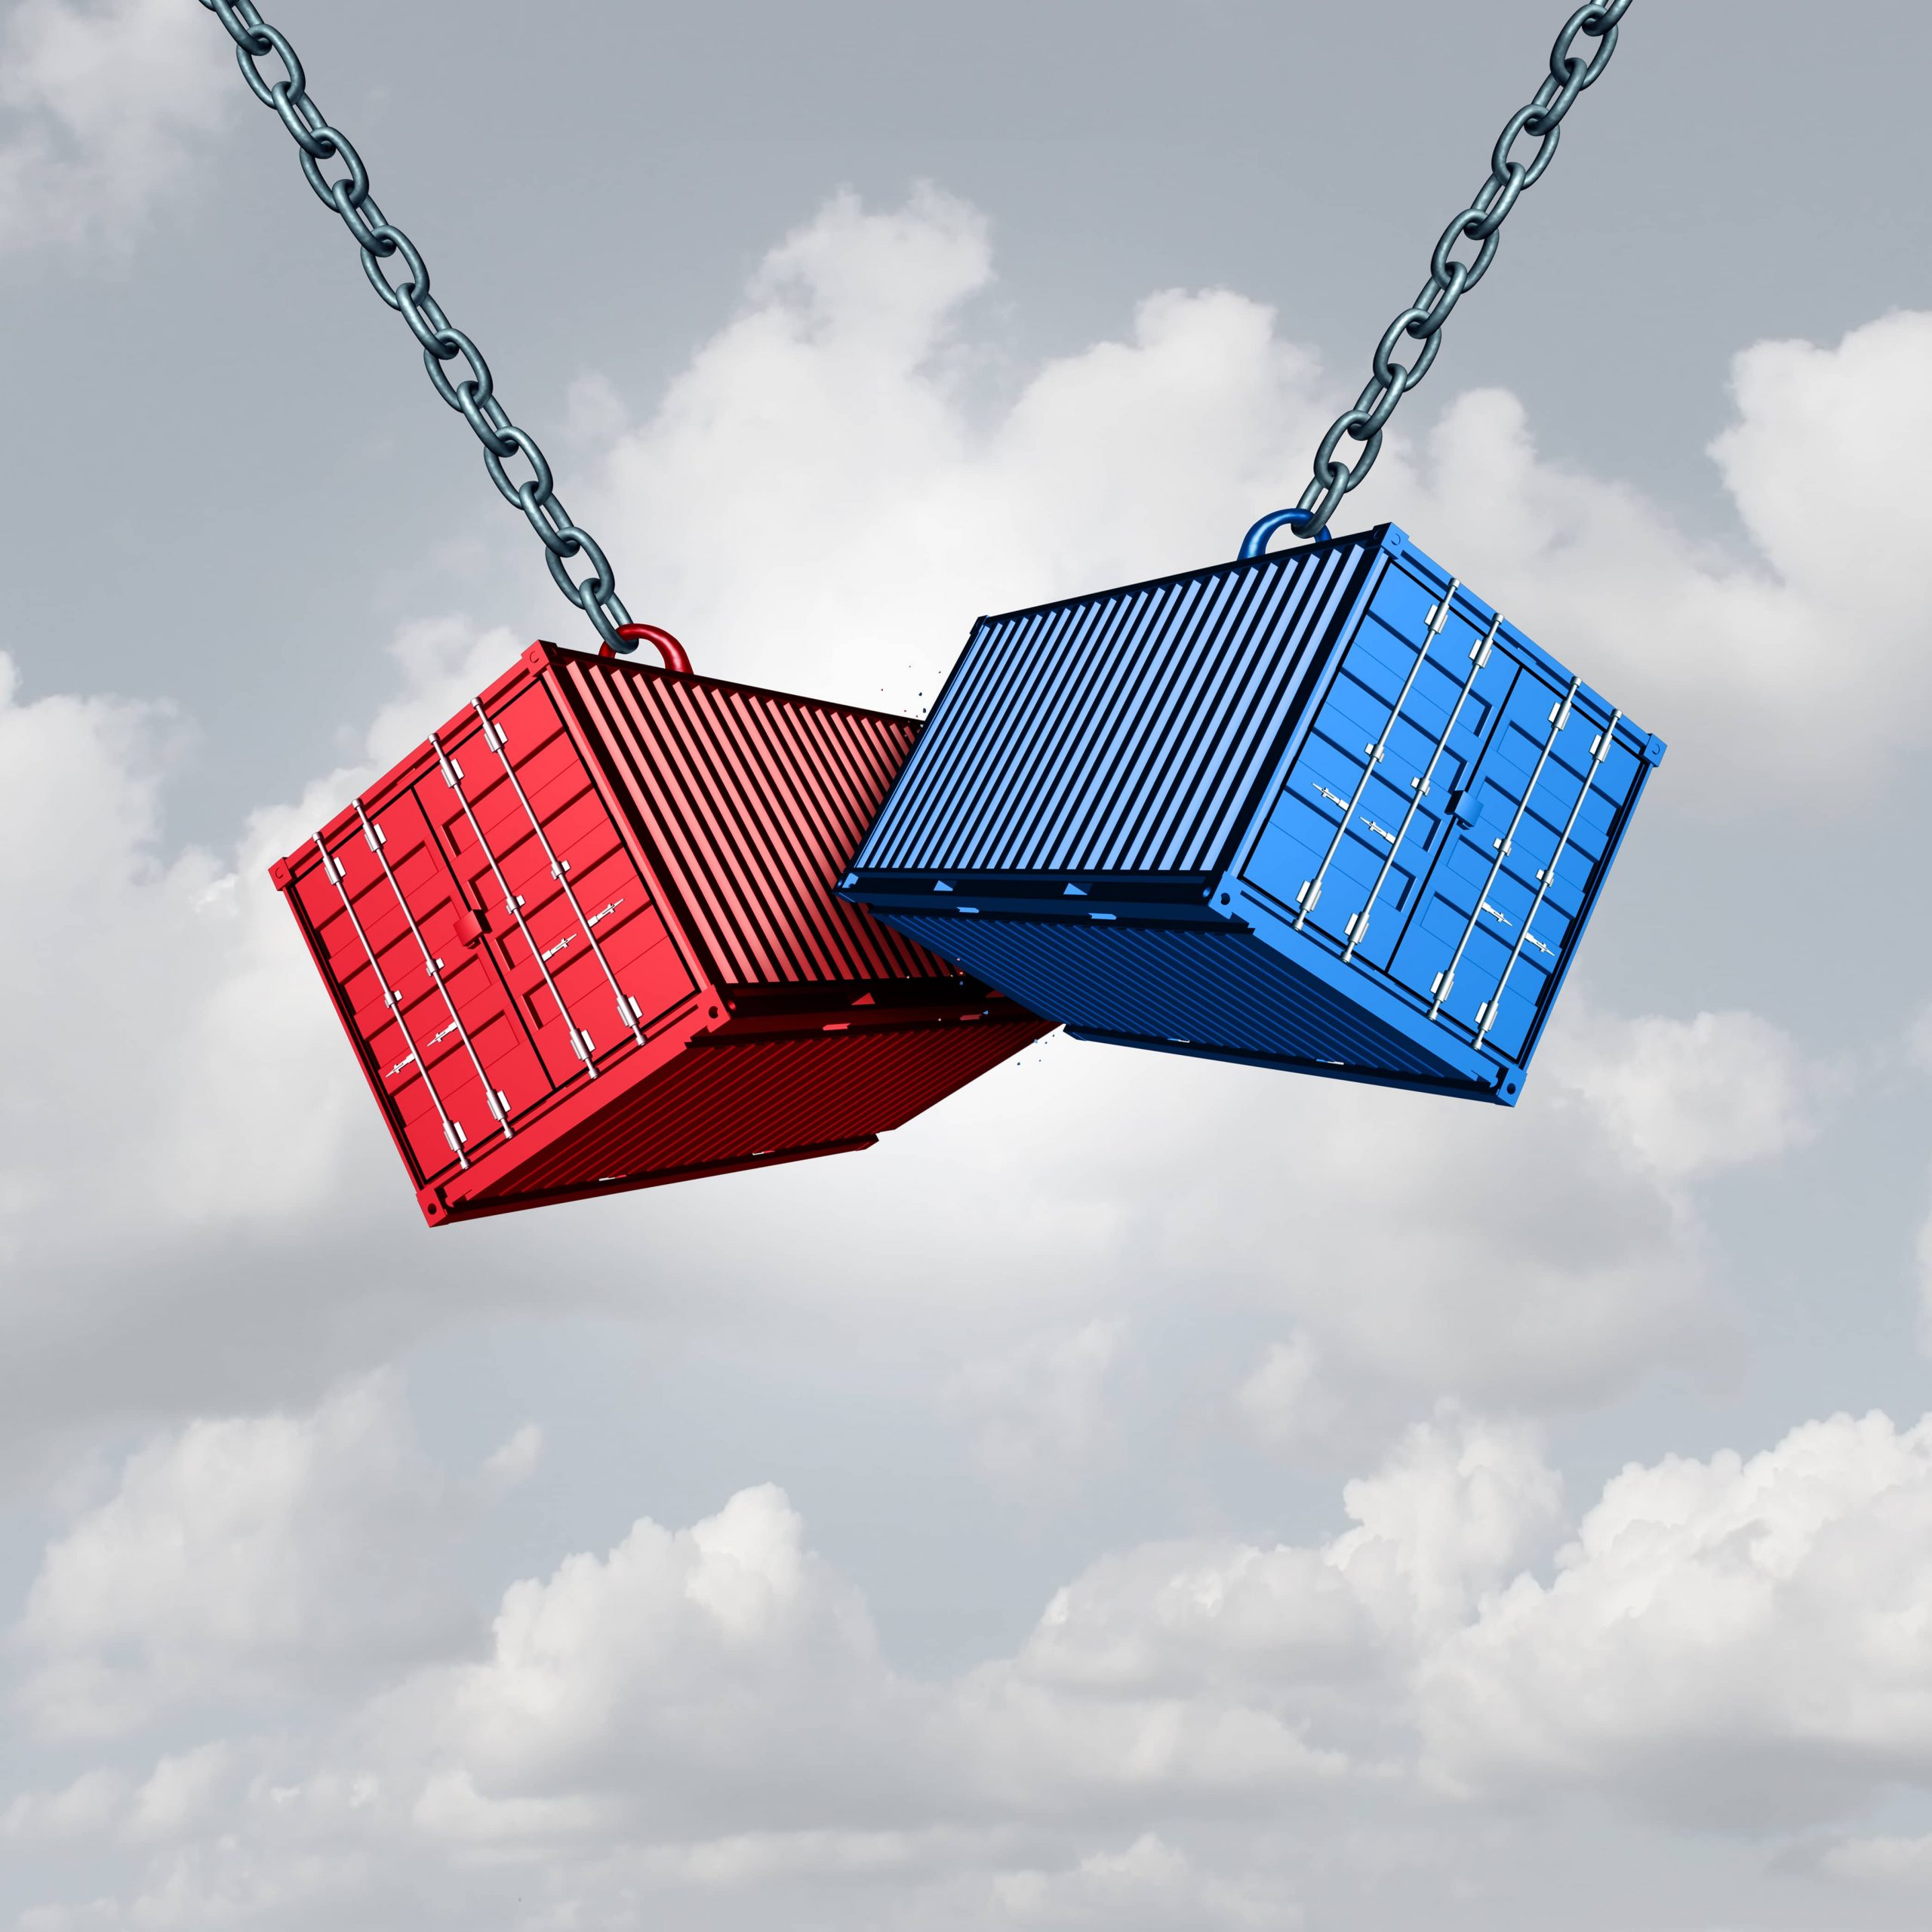 Trade War Concept And Economic Conflict Metaphor As Two Cargo Freight Shipping Containers Crashing Into Each Other As A Financial Commerce Symbol With 3D Illustration.